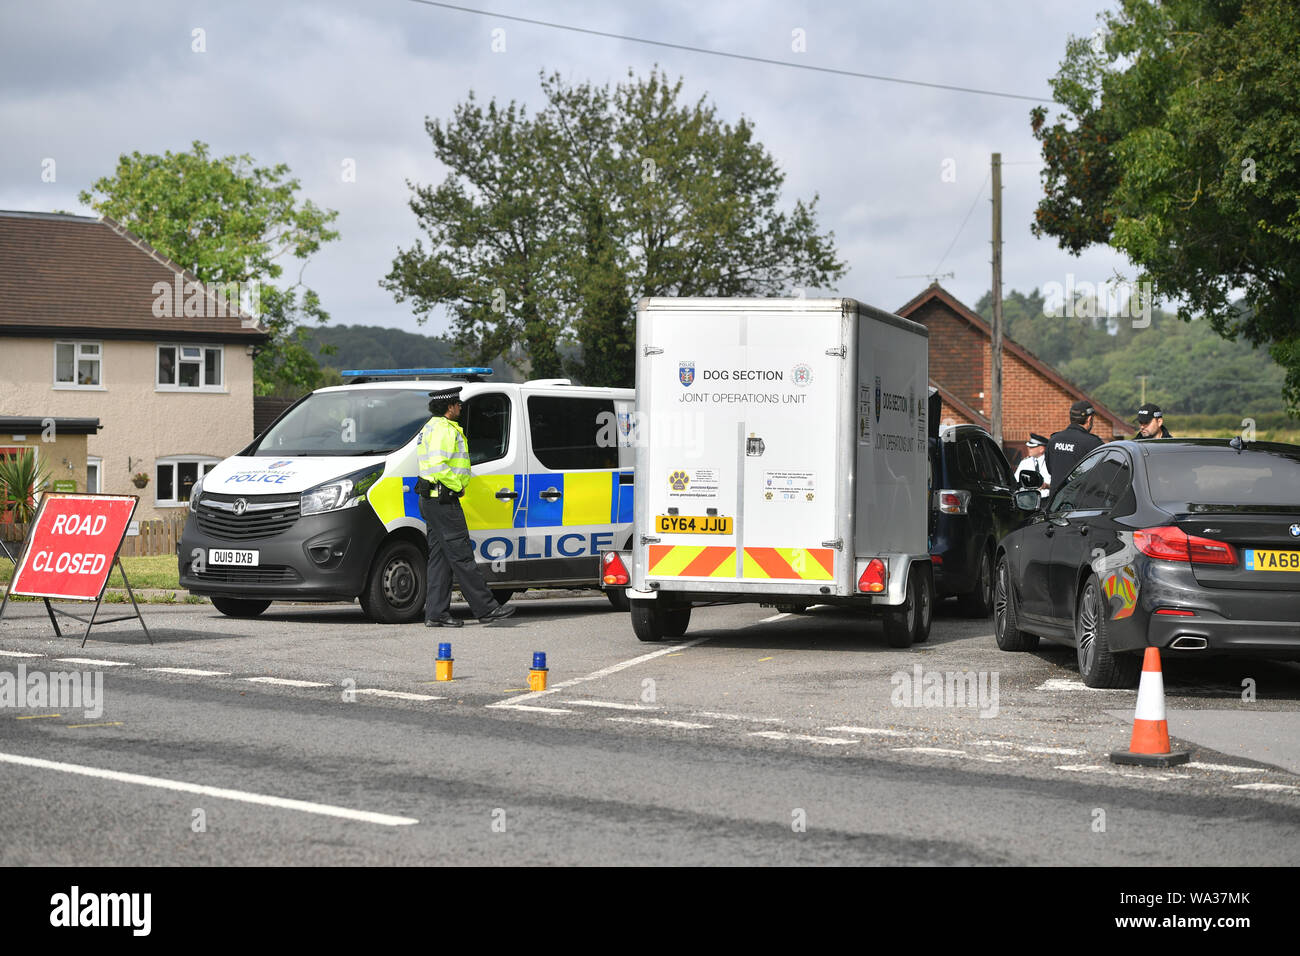 Police officers remain at the scene, near Sulhamstead, Berkshire, where Thames Valley Police officer Pc Andrew Harper, 28, died following a 'serious incident' at about 11.30pm on Thursday near the A4 Bath Road, between Reading and Newbury, at the village of Sulhamstead in Berkshire. Stock Photo